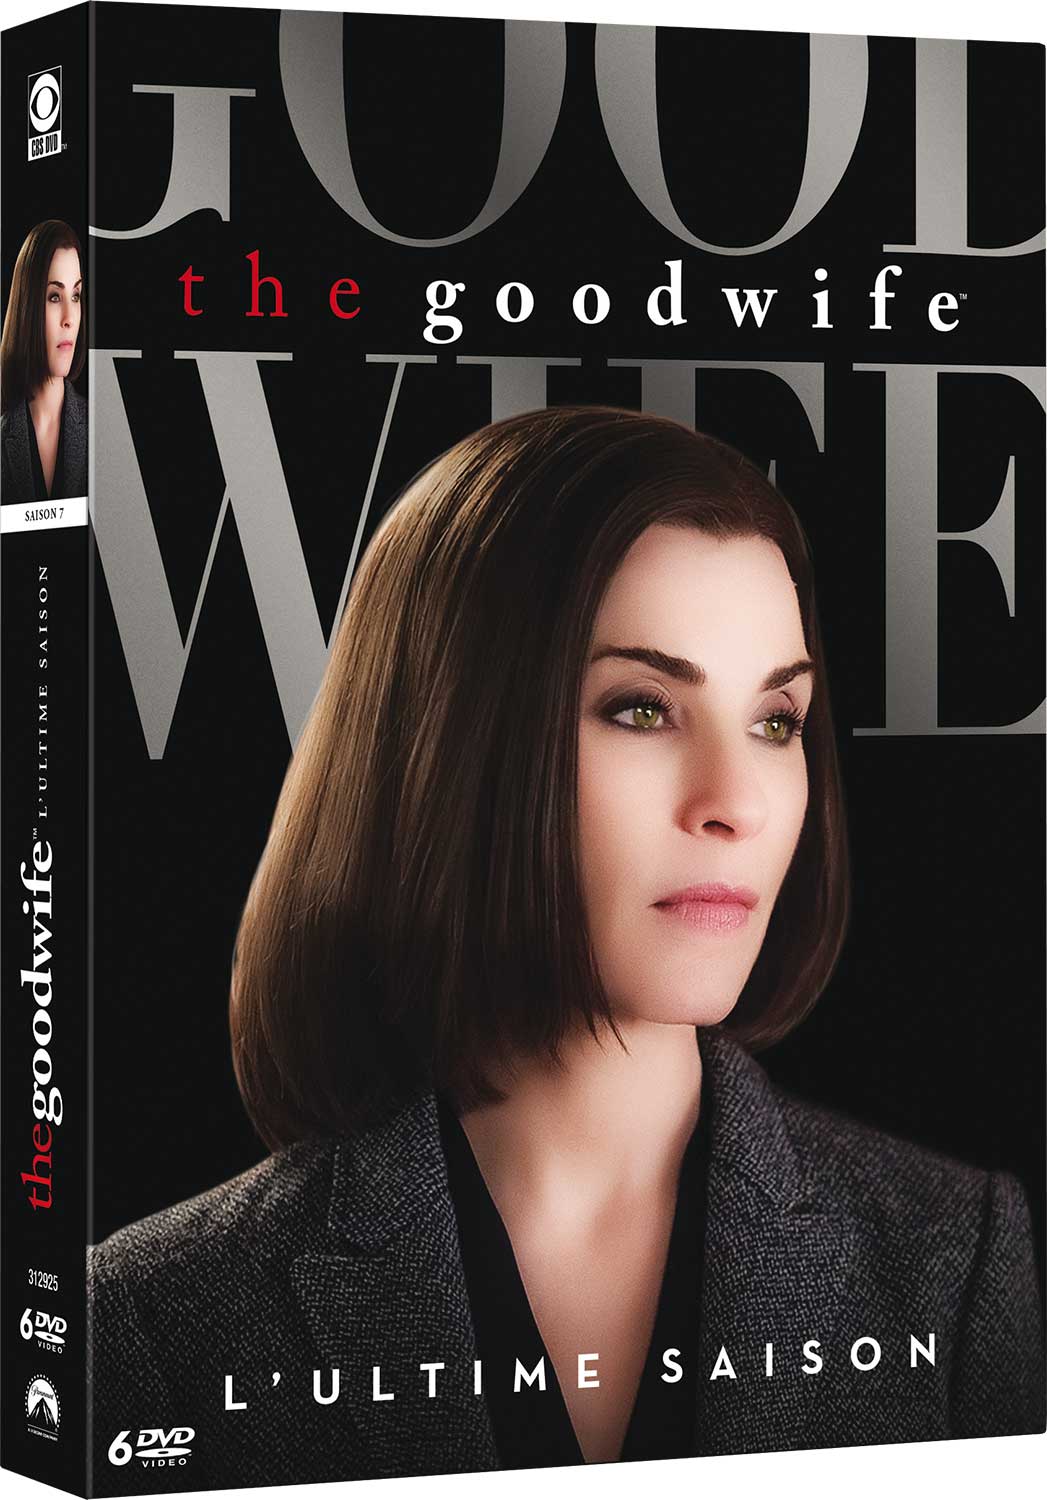 THE GOOD WIFE S07